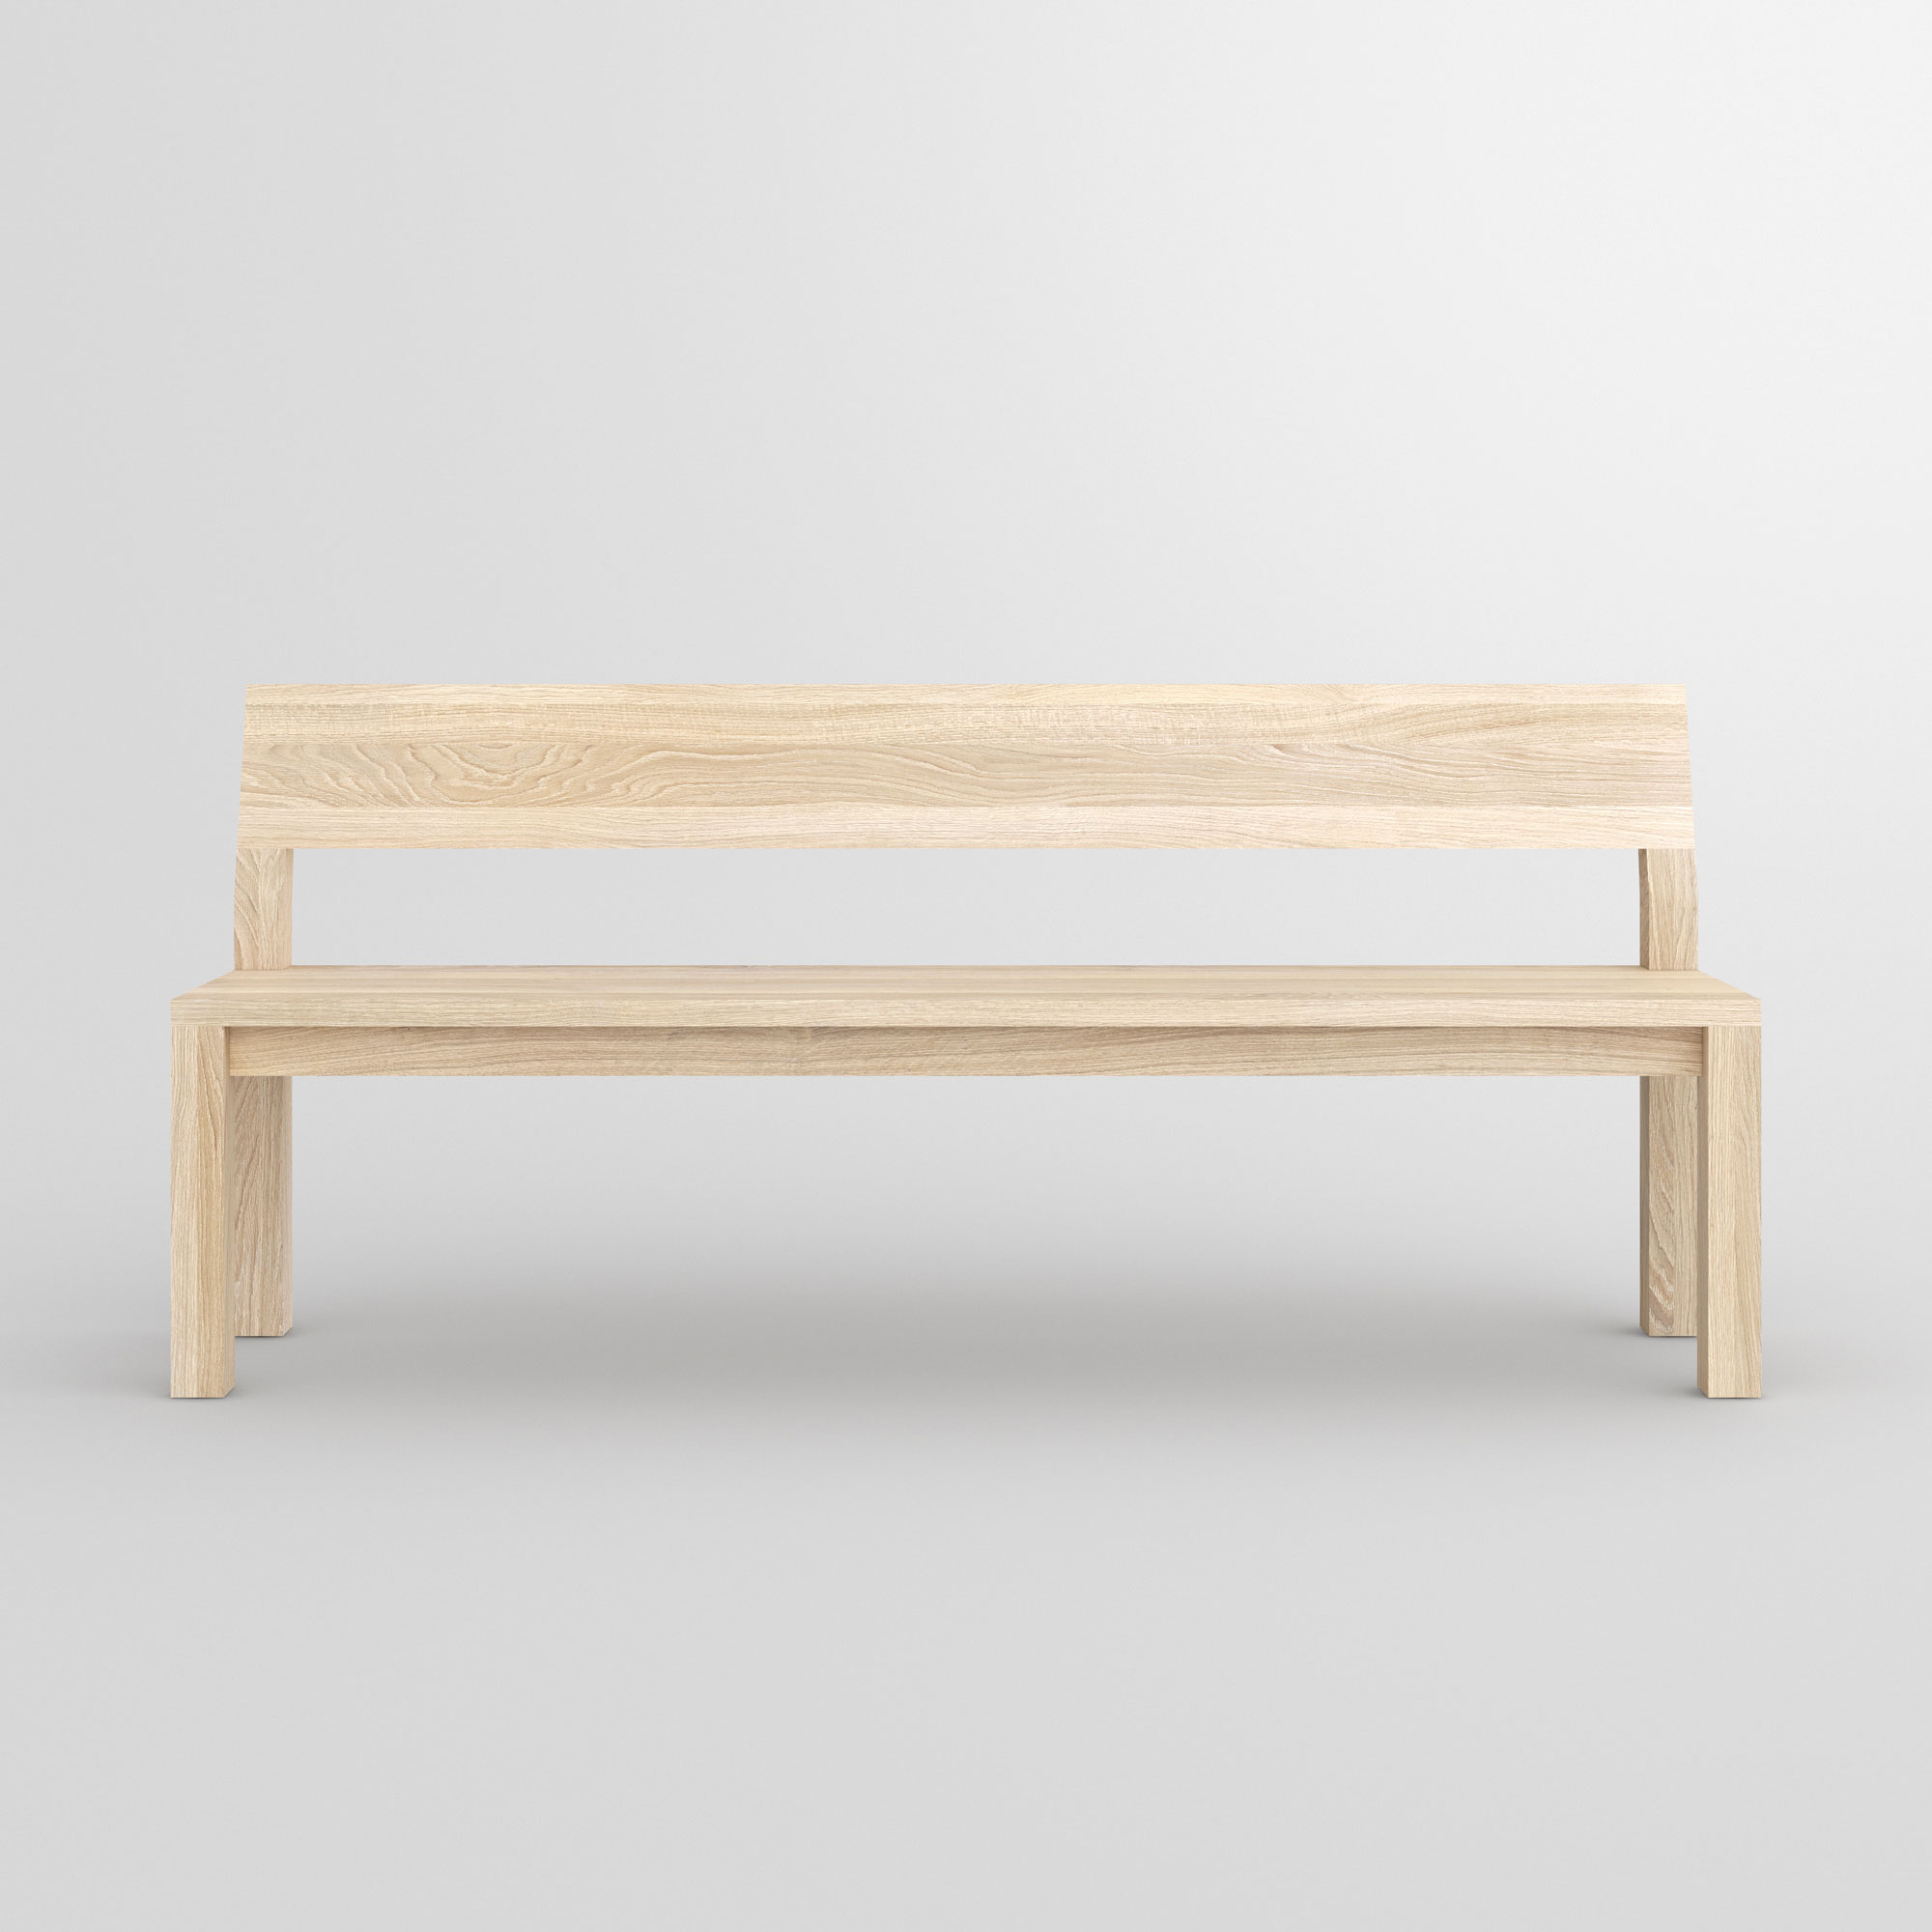 Bench with Backrest CUBUS RL cam3 custom made in solid wood by vitamin design